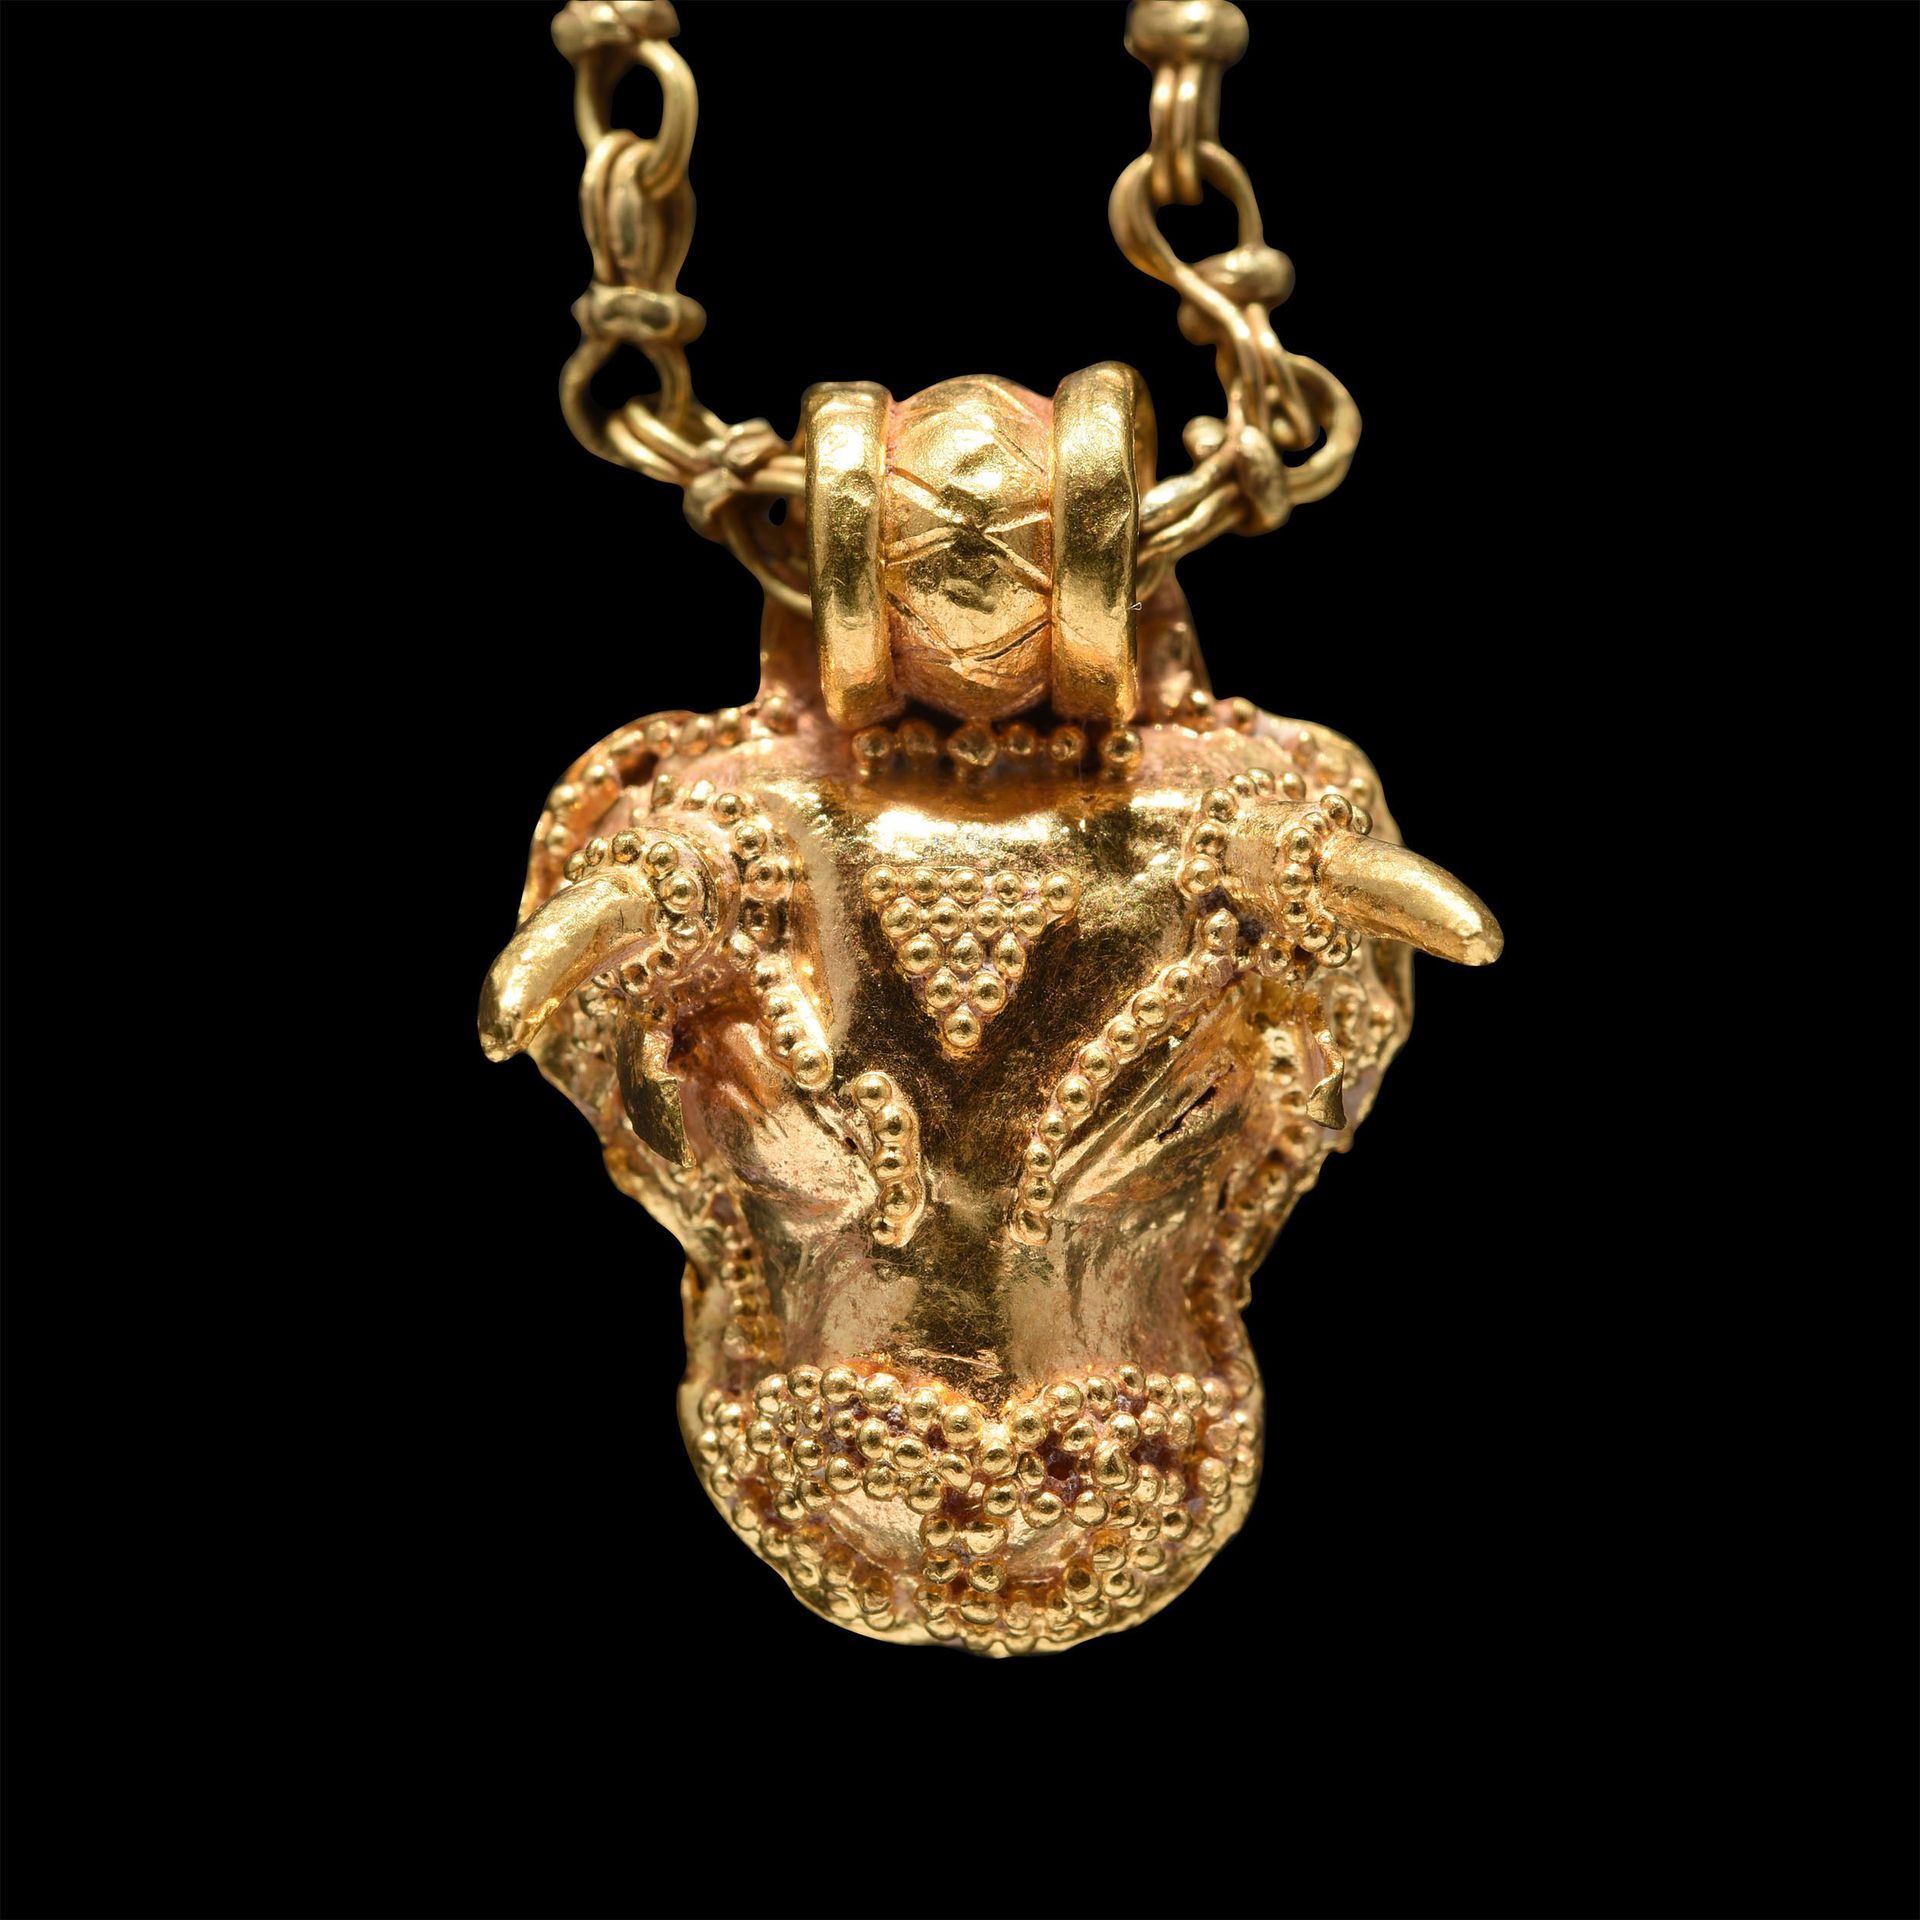 Null BULL'S HEAD PENDANT

Eastern Greece, mid 6th century BC

Gold with granulat&hellip;